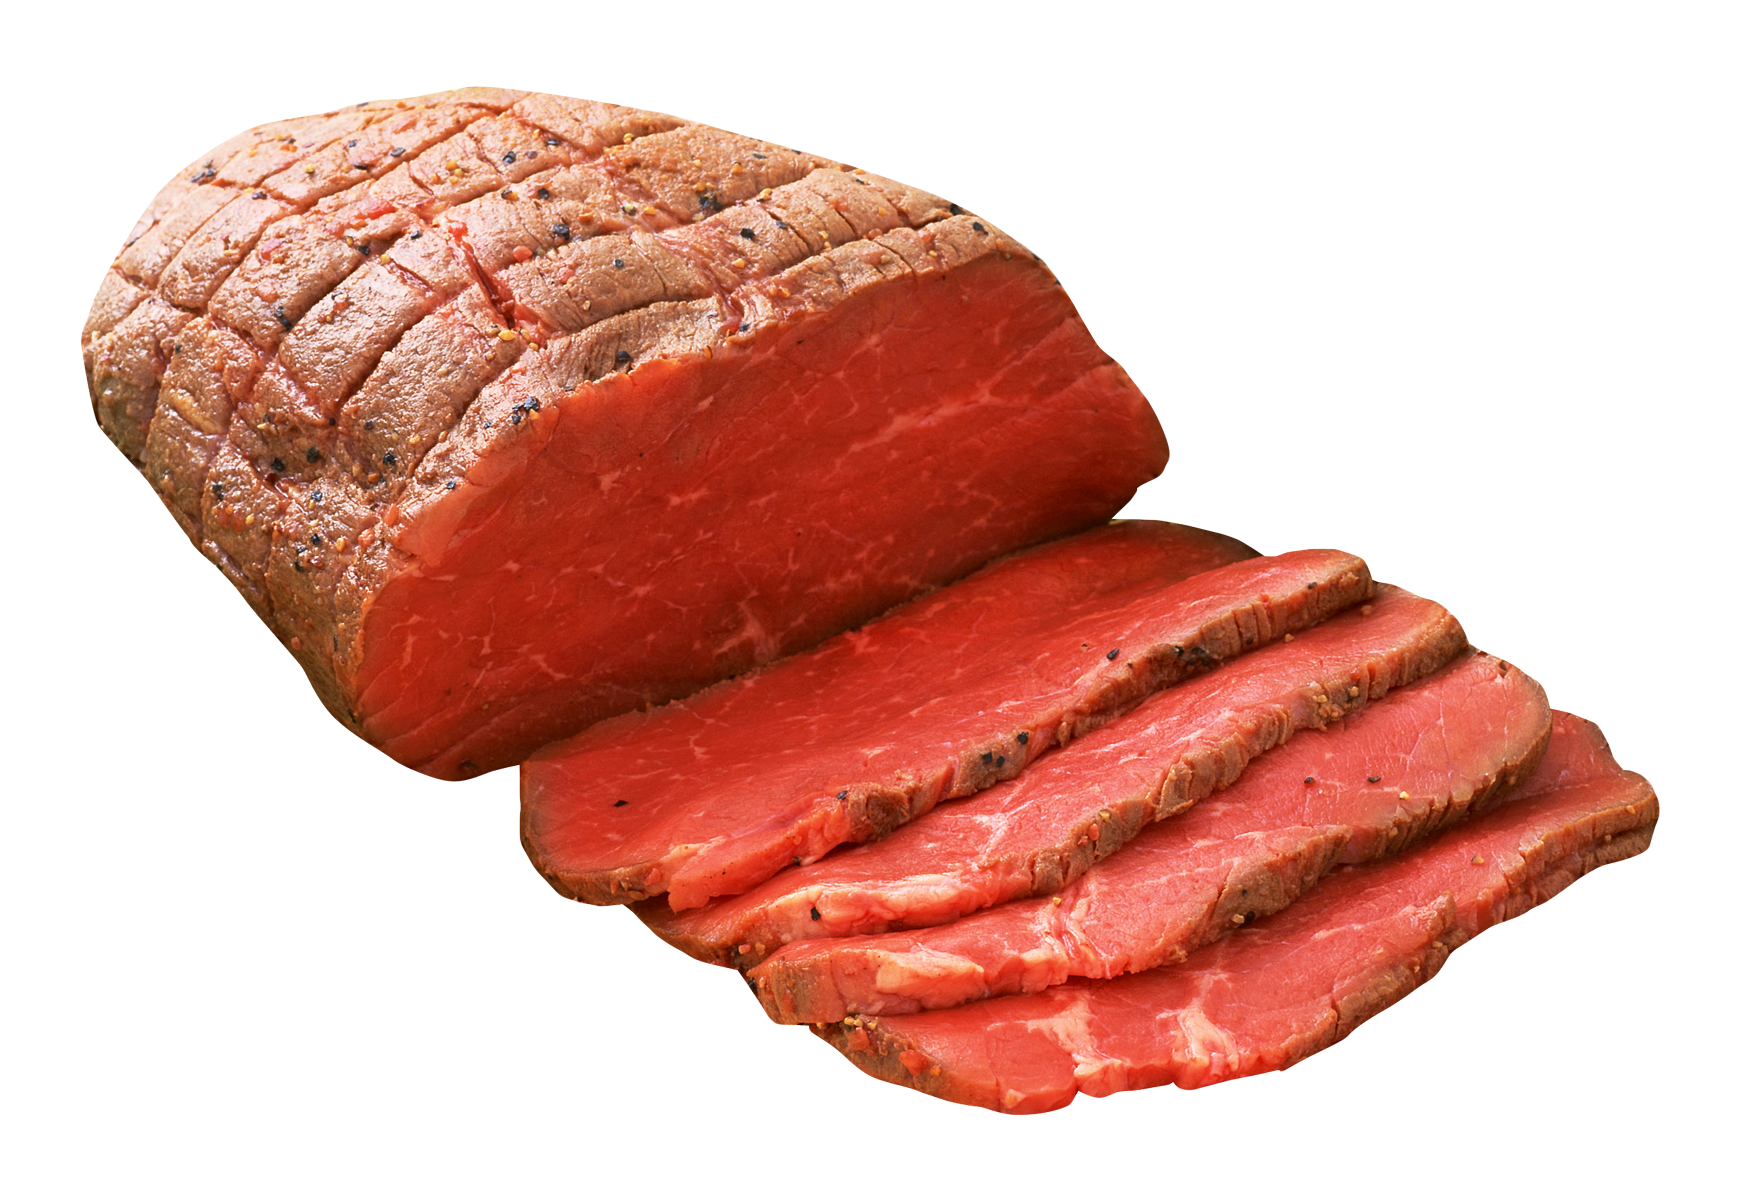 Meat Png Transparent Image - Meat, Transparent background PNG HD thumbnail